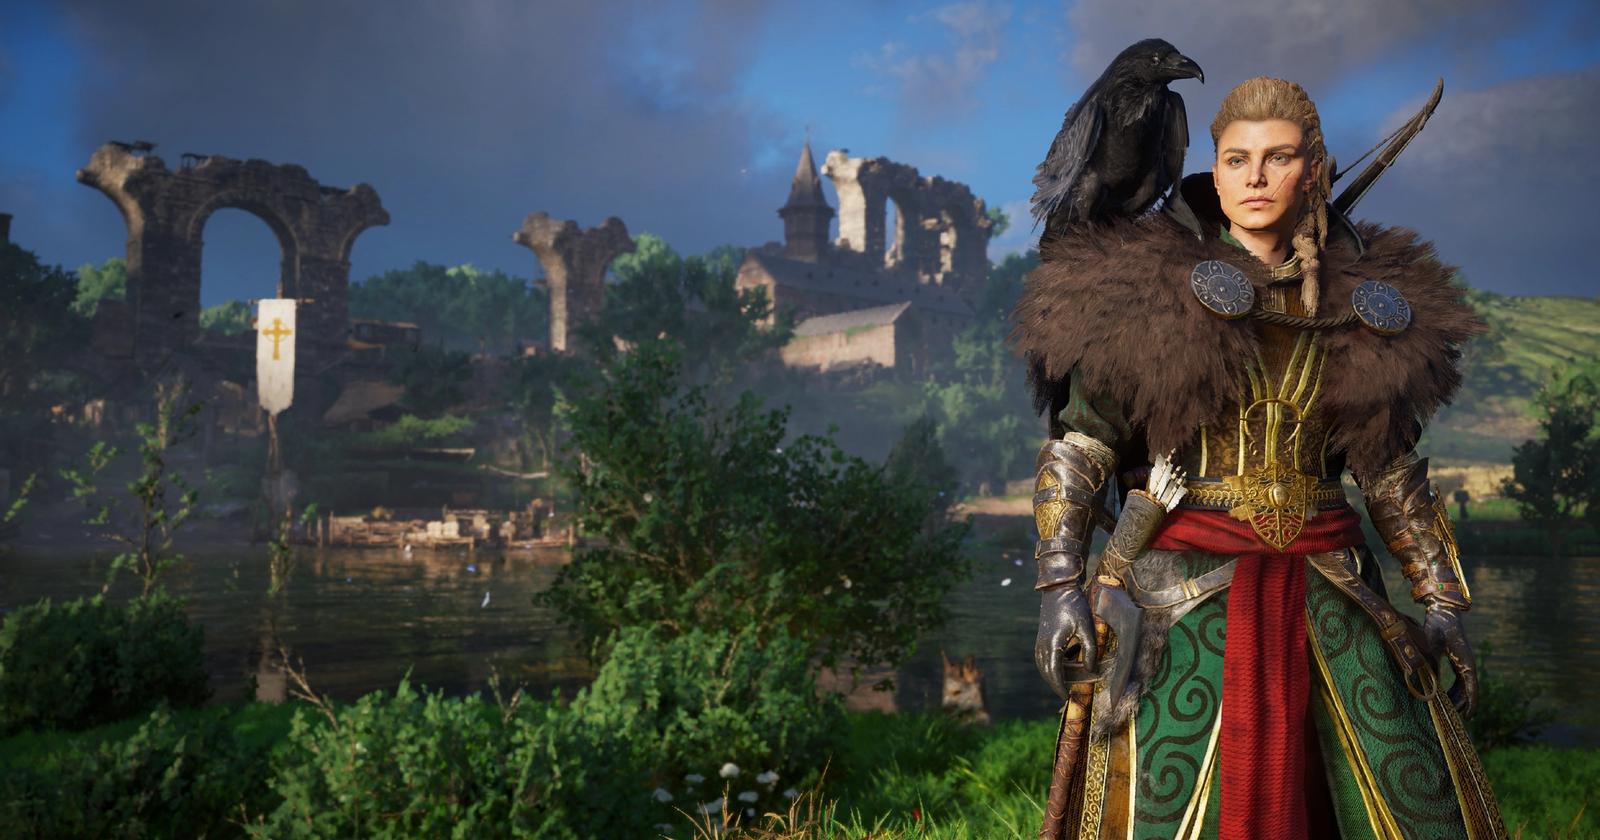 Assassin's Creed Valhalla review: Dining with the Gods